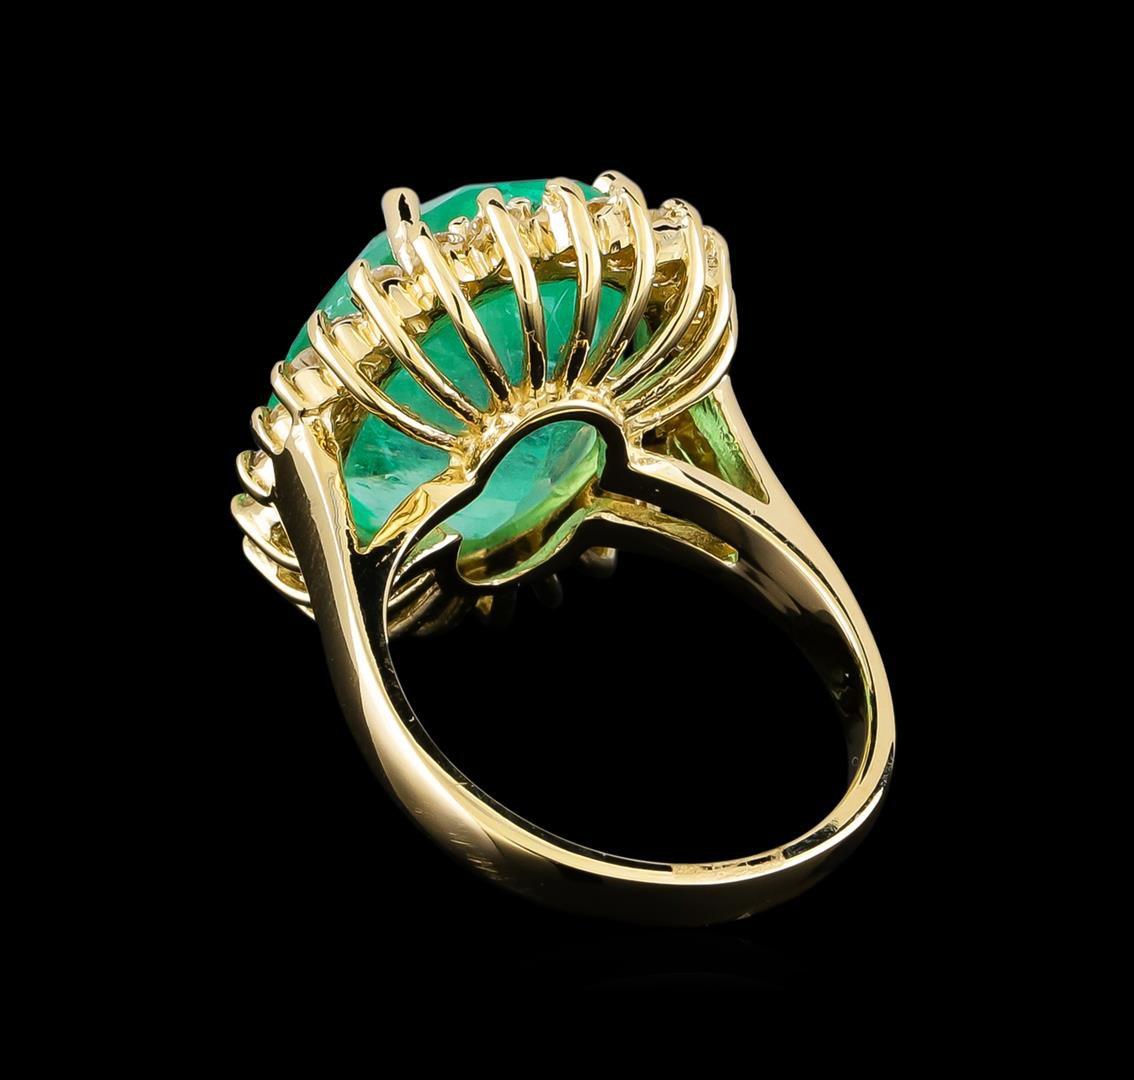 10.45 ctw Emerald and Diamond Ring - 14KT Yellow Gold